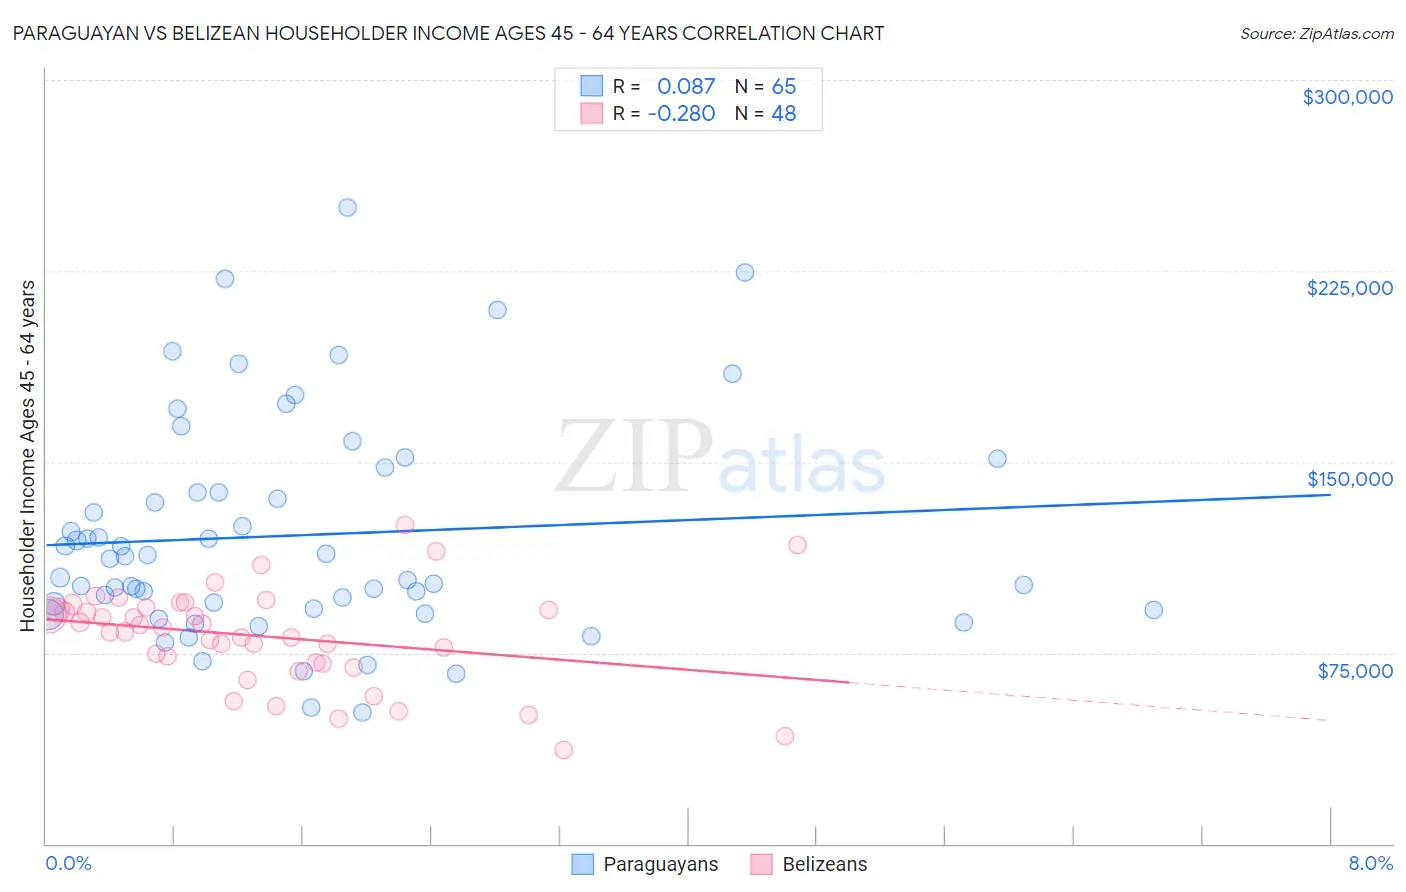 Paraguayan vs Belizean Householder Income Ages 45 - 64 years